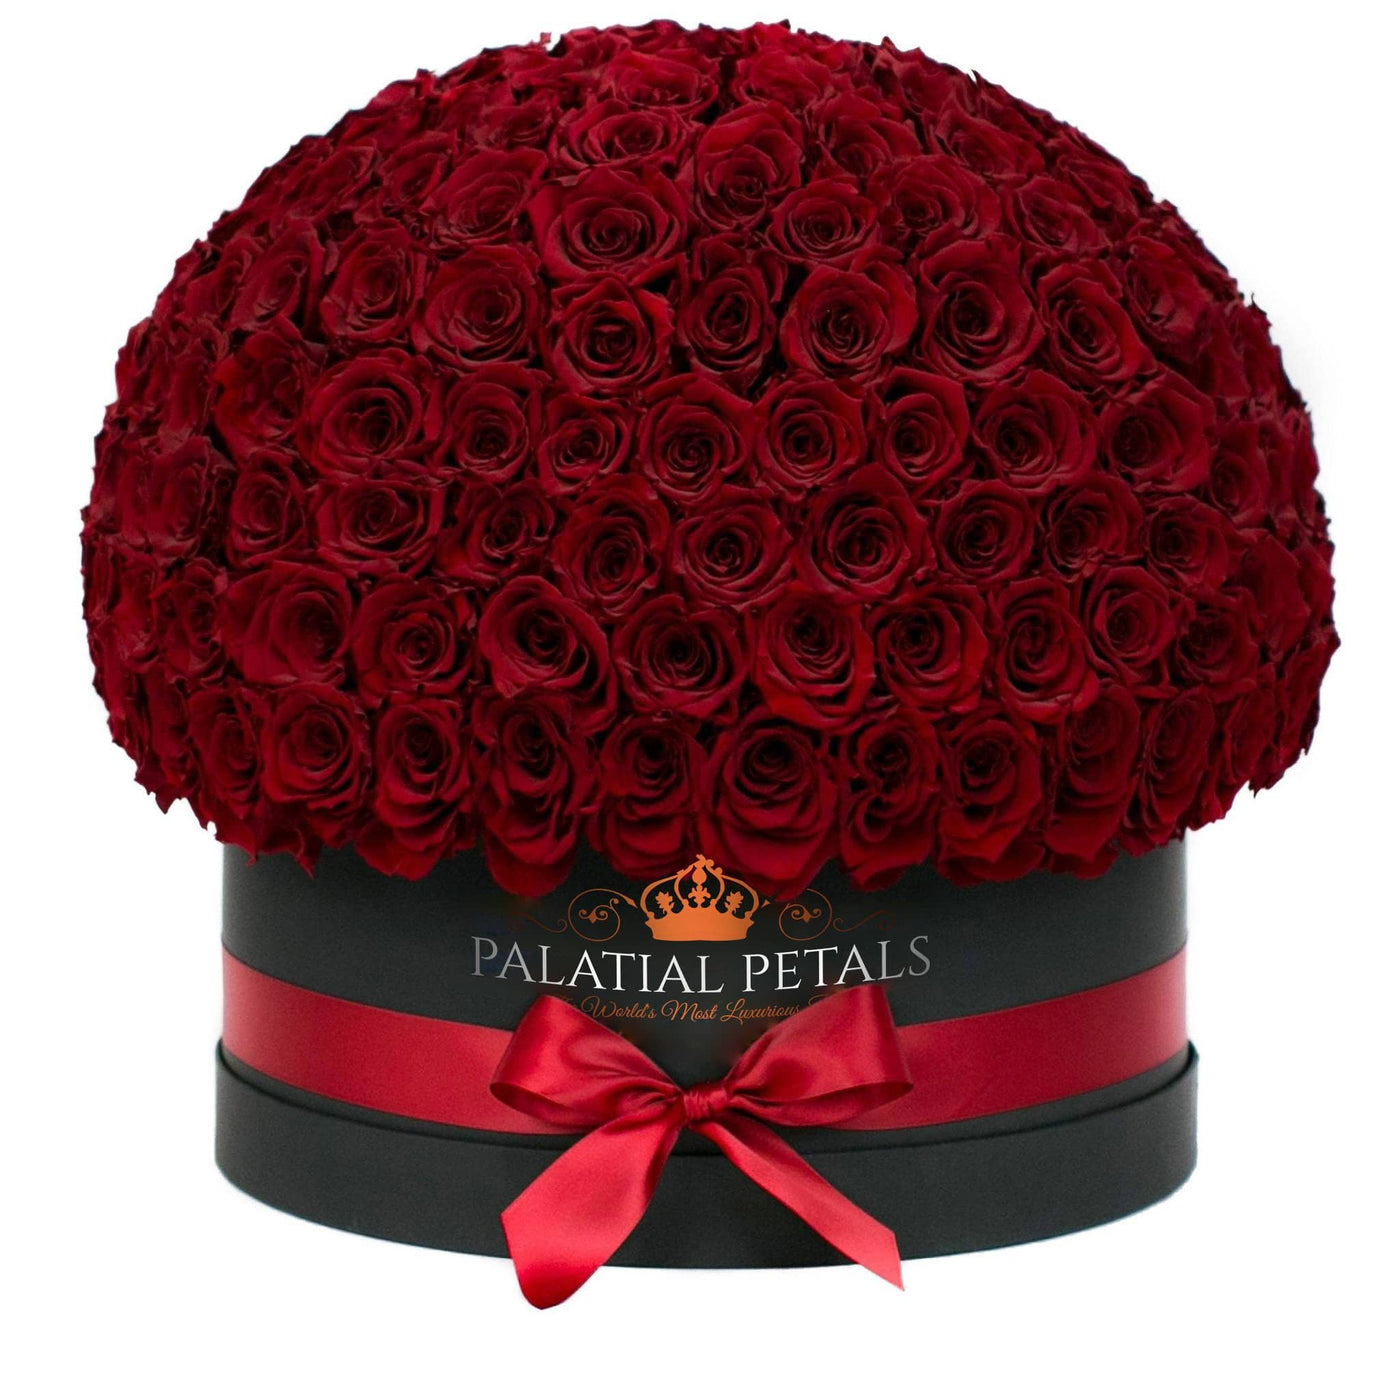 Louboutin Red Roses - Deluxe "Crown"